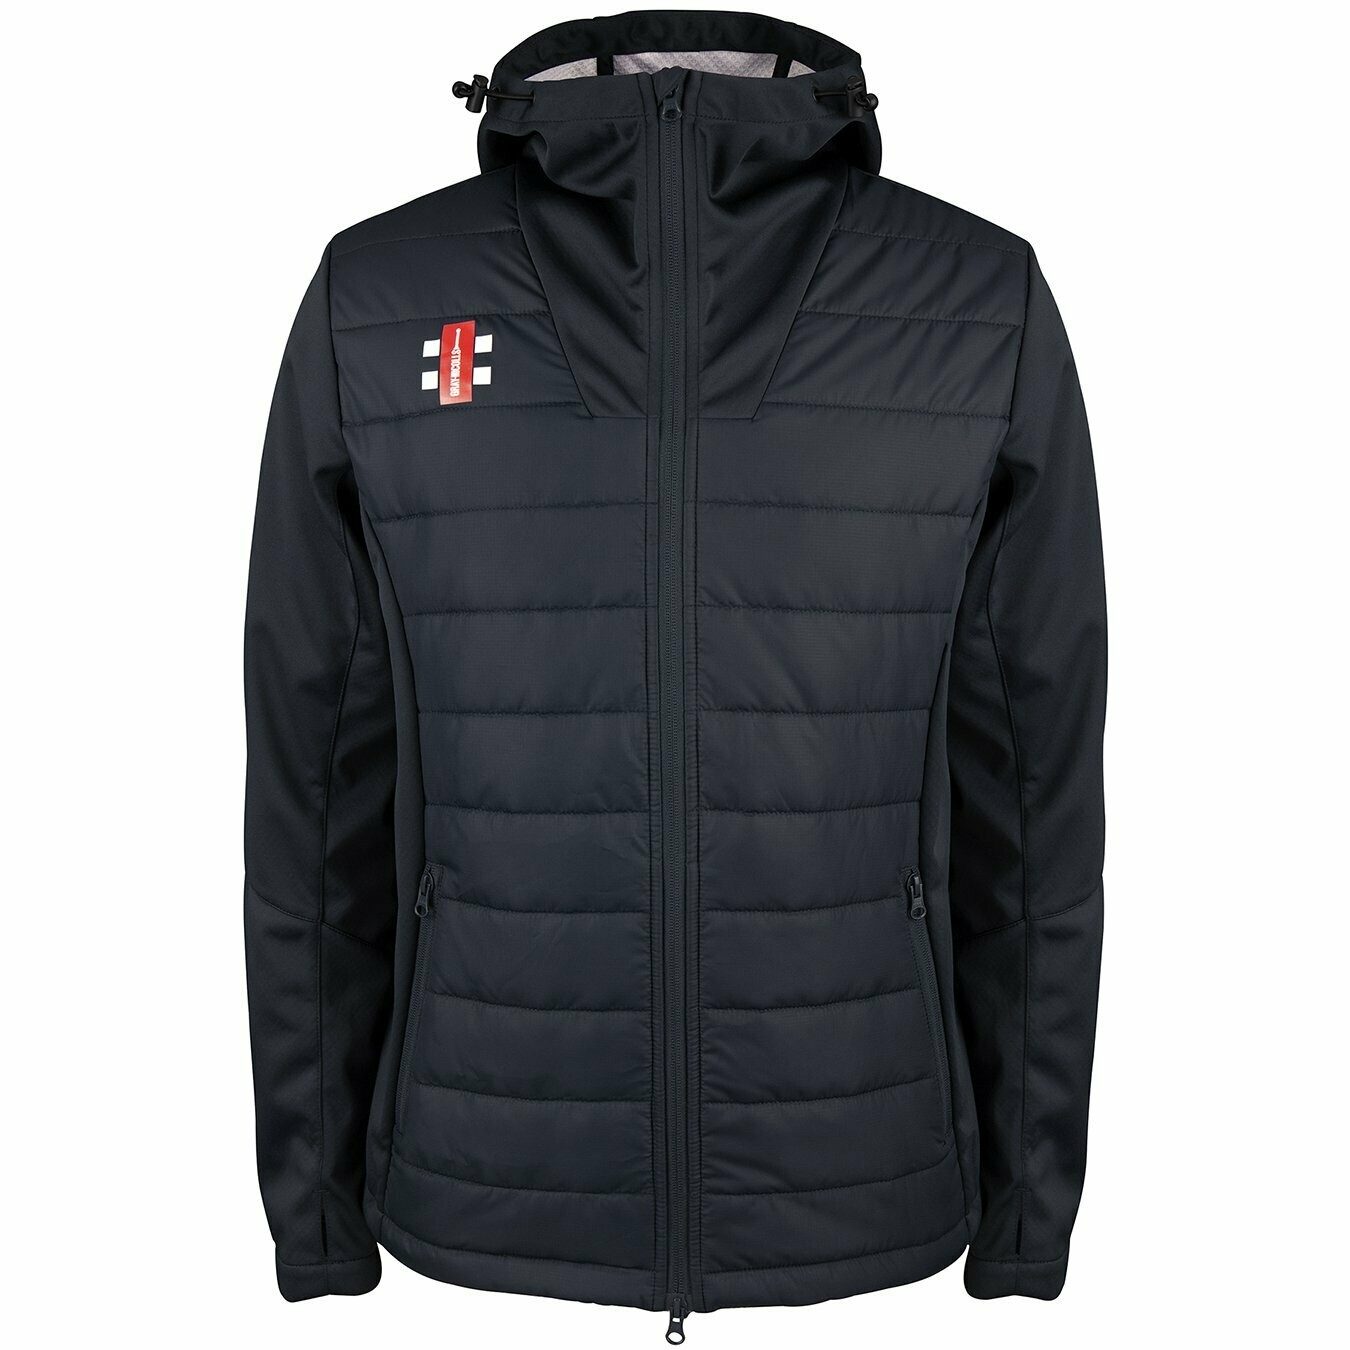 MIddlesbrough Pro Performance Outdoor Jacket